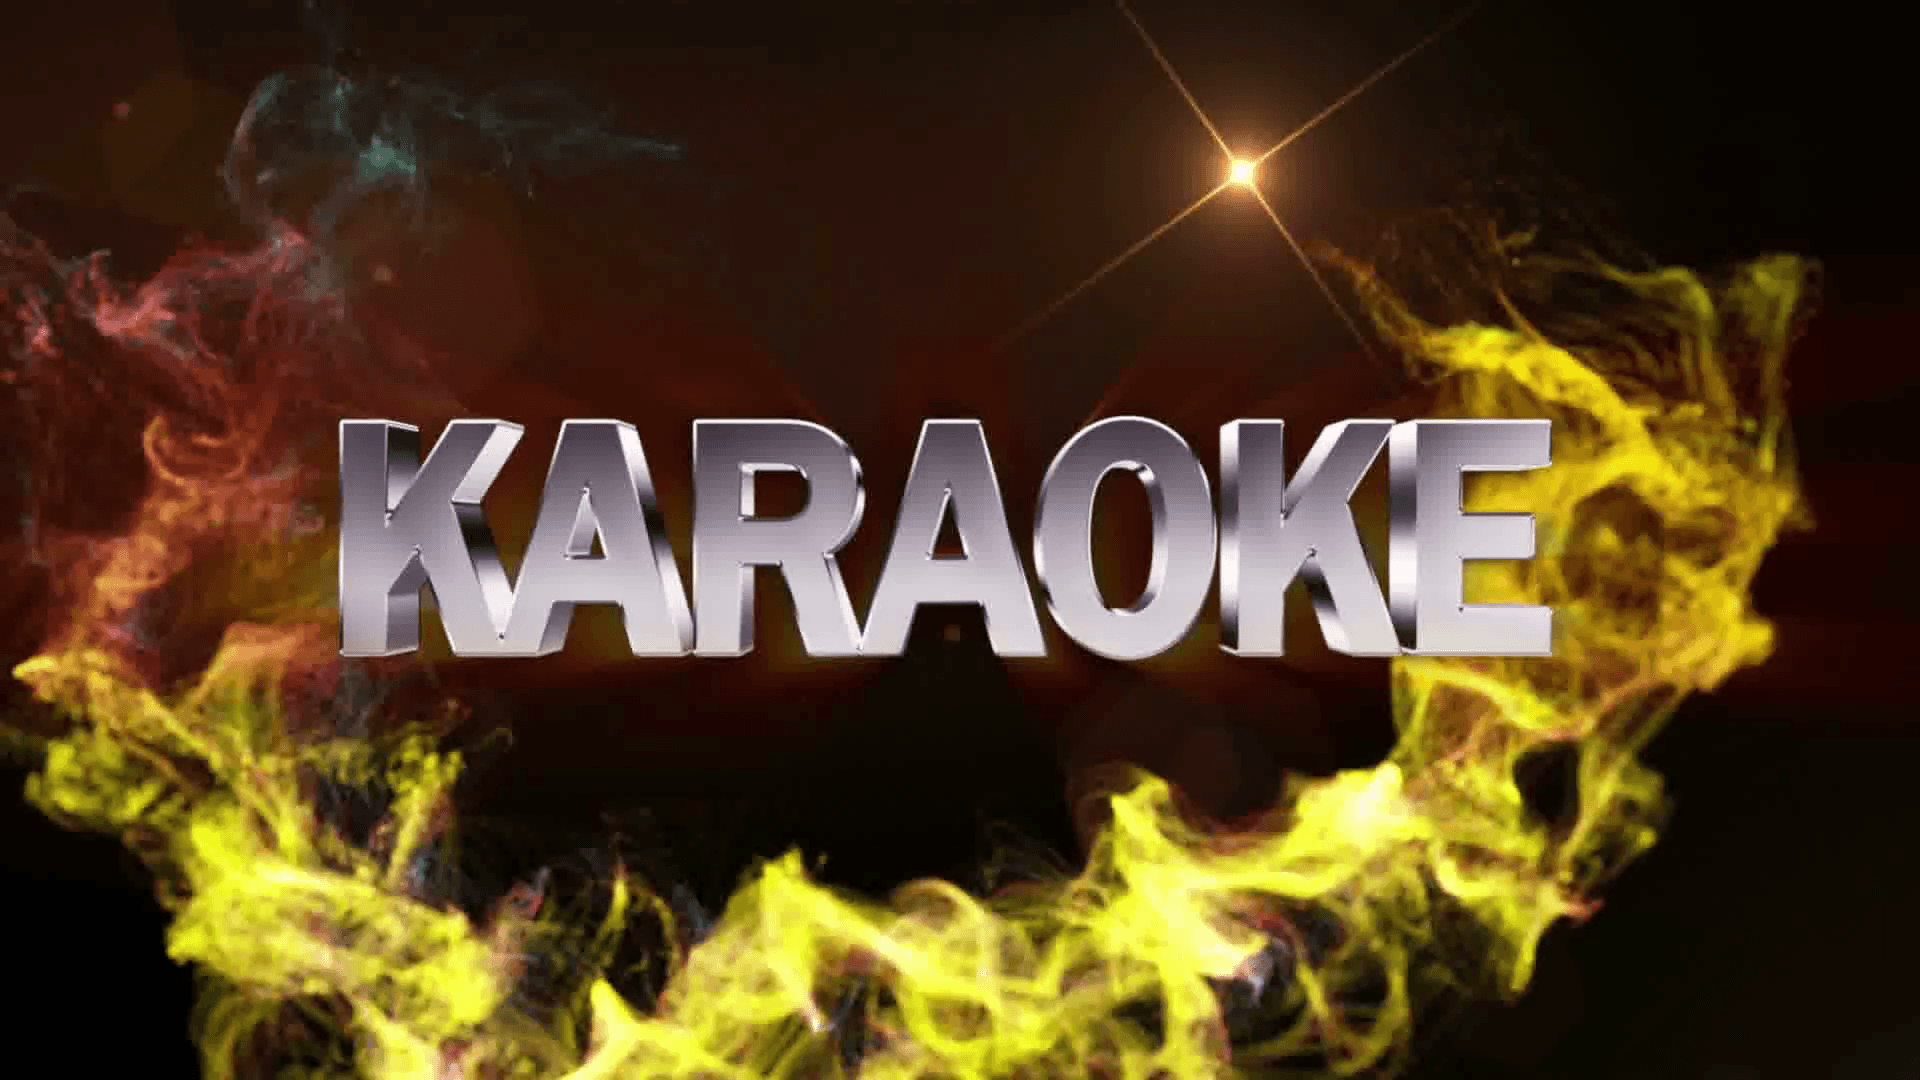 KARAOKE Text Animation and Particles Ring, with Final White